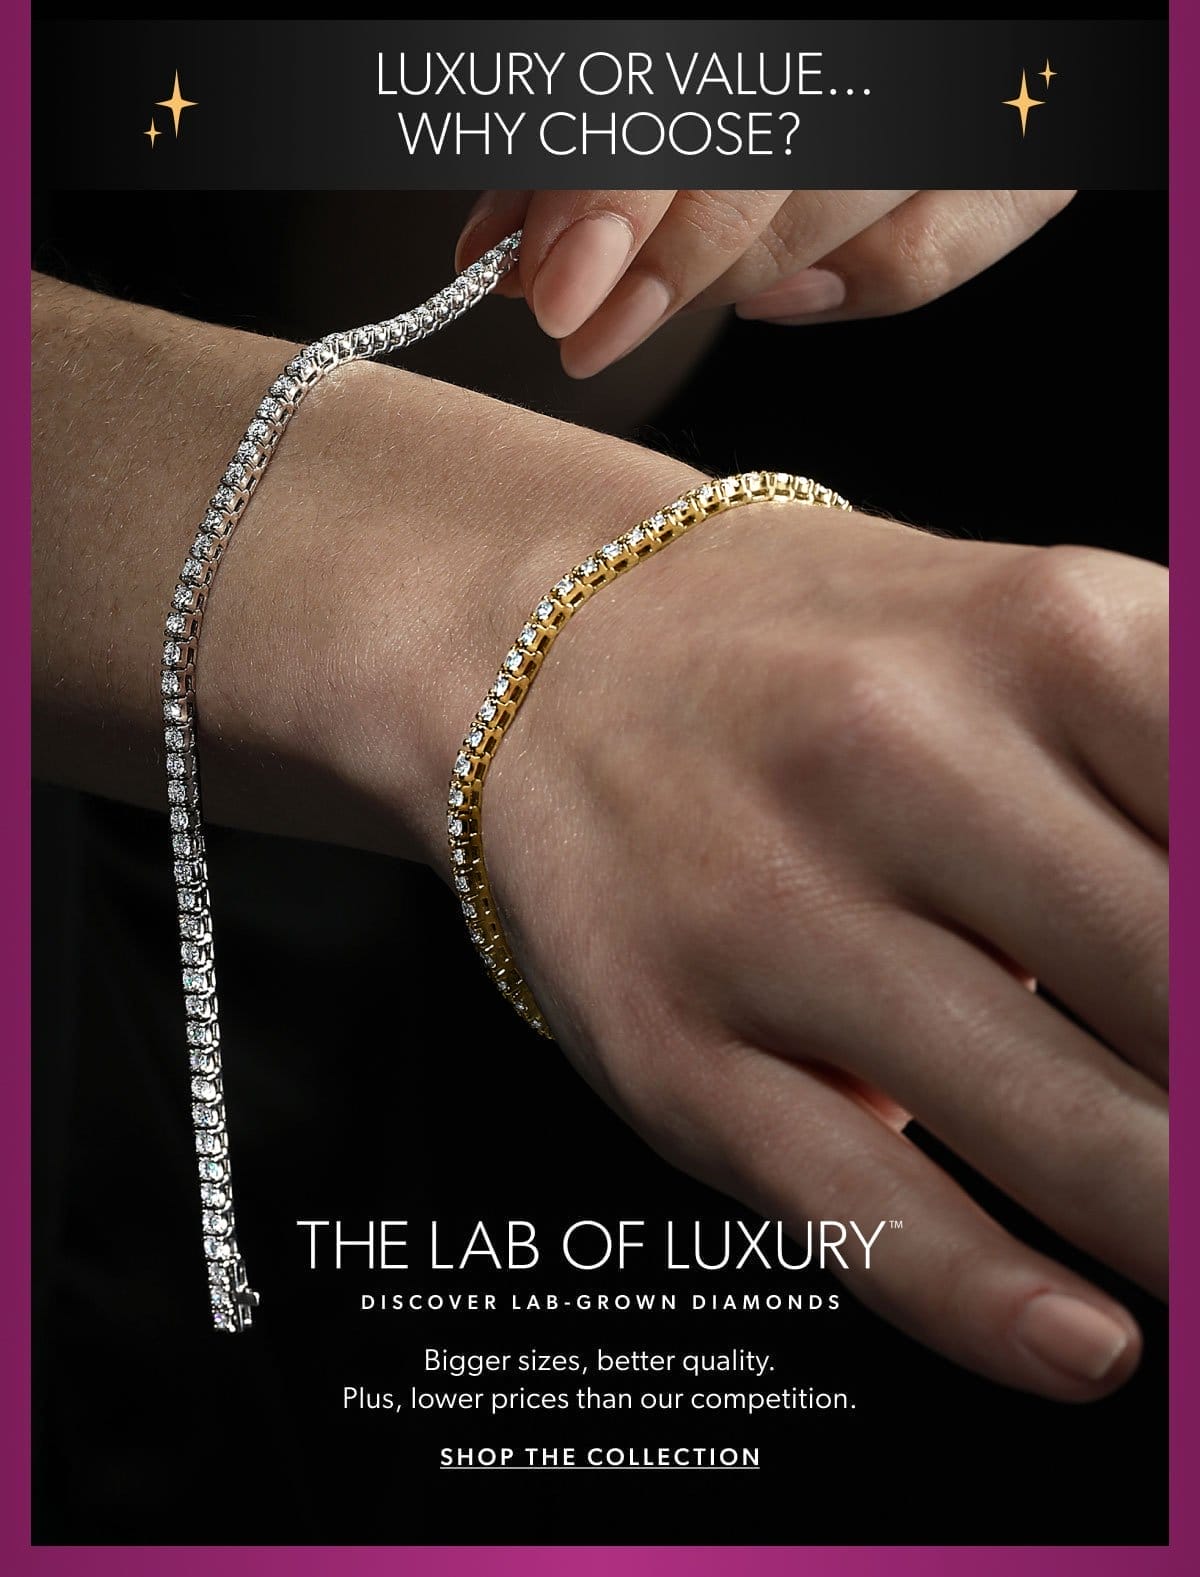 The Lab of Luxury. Shop The Collection